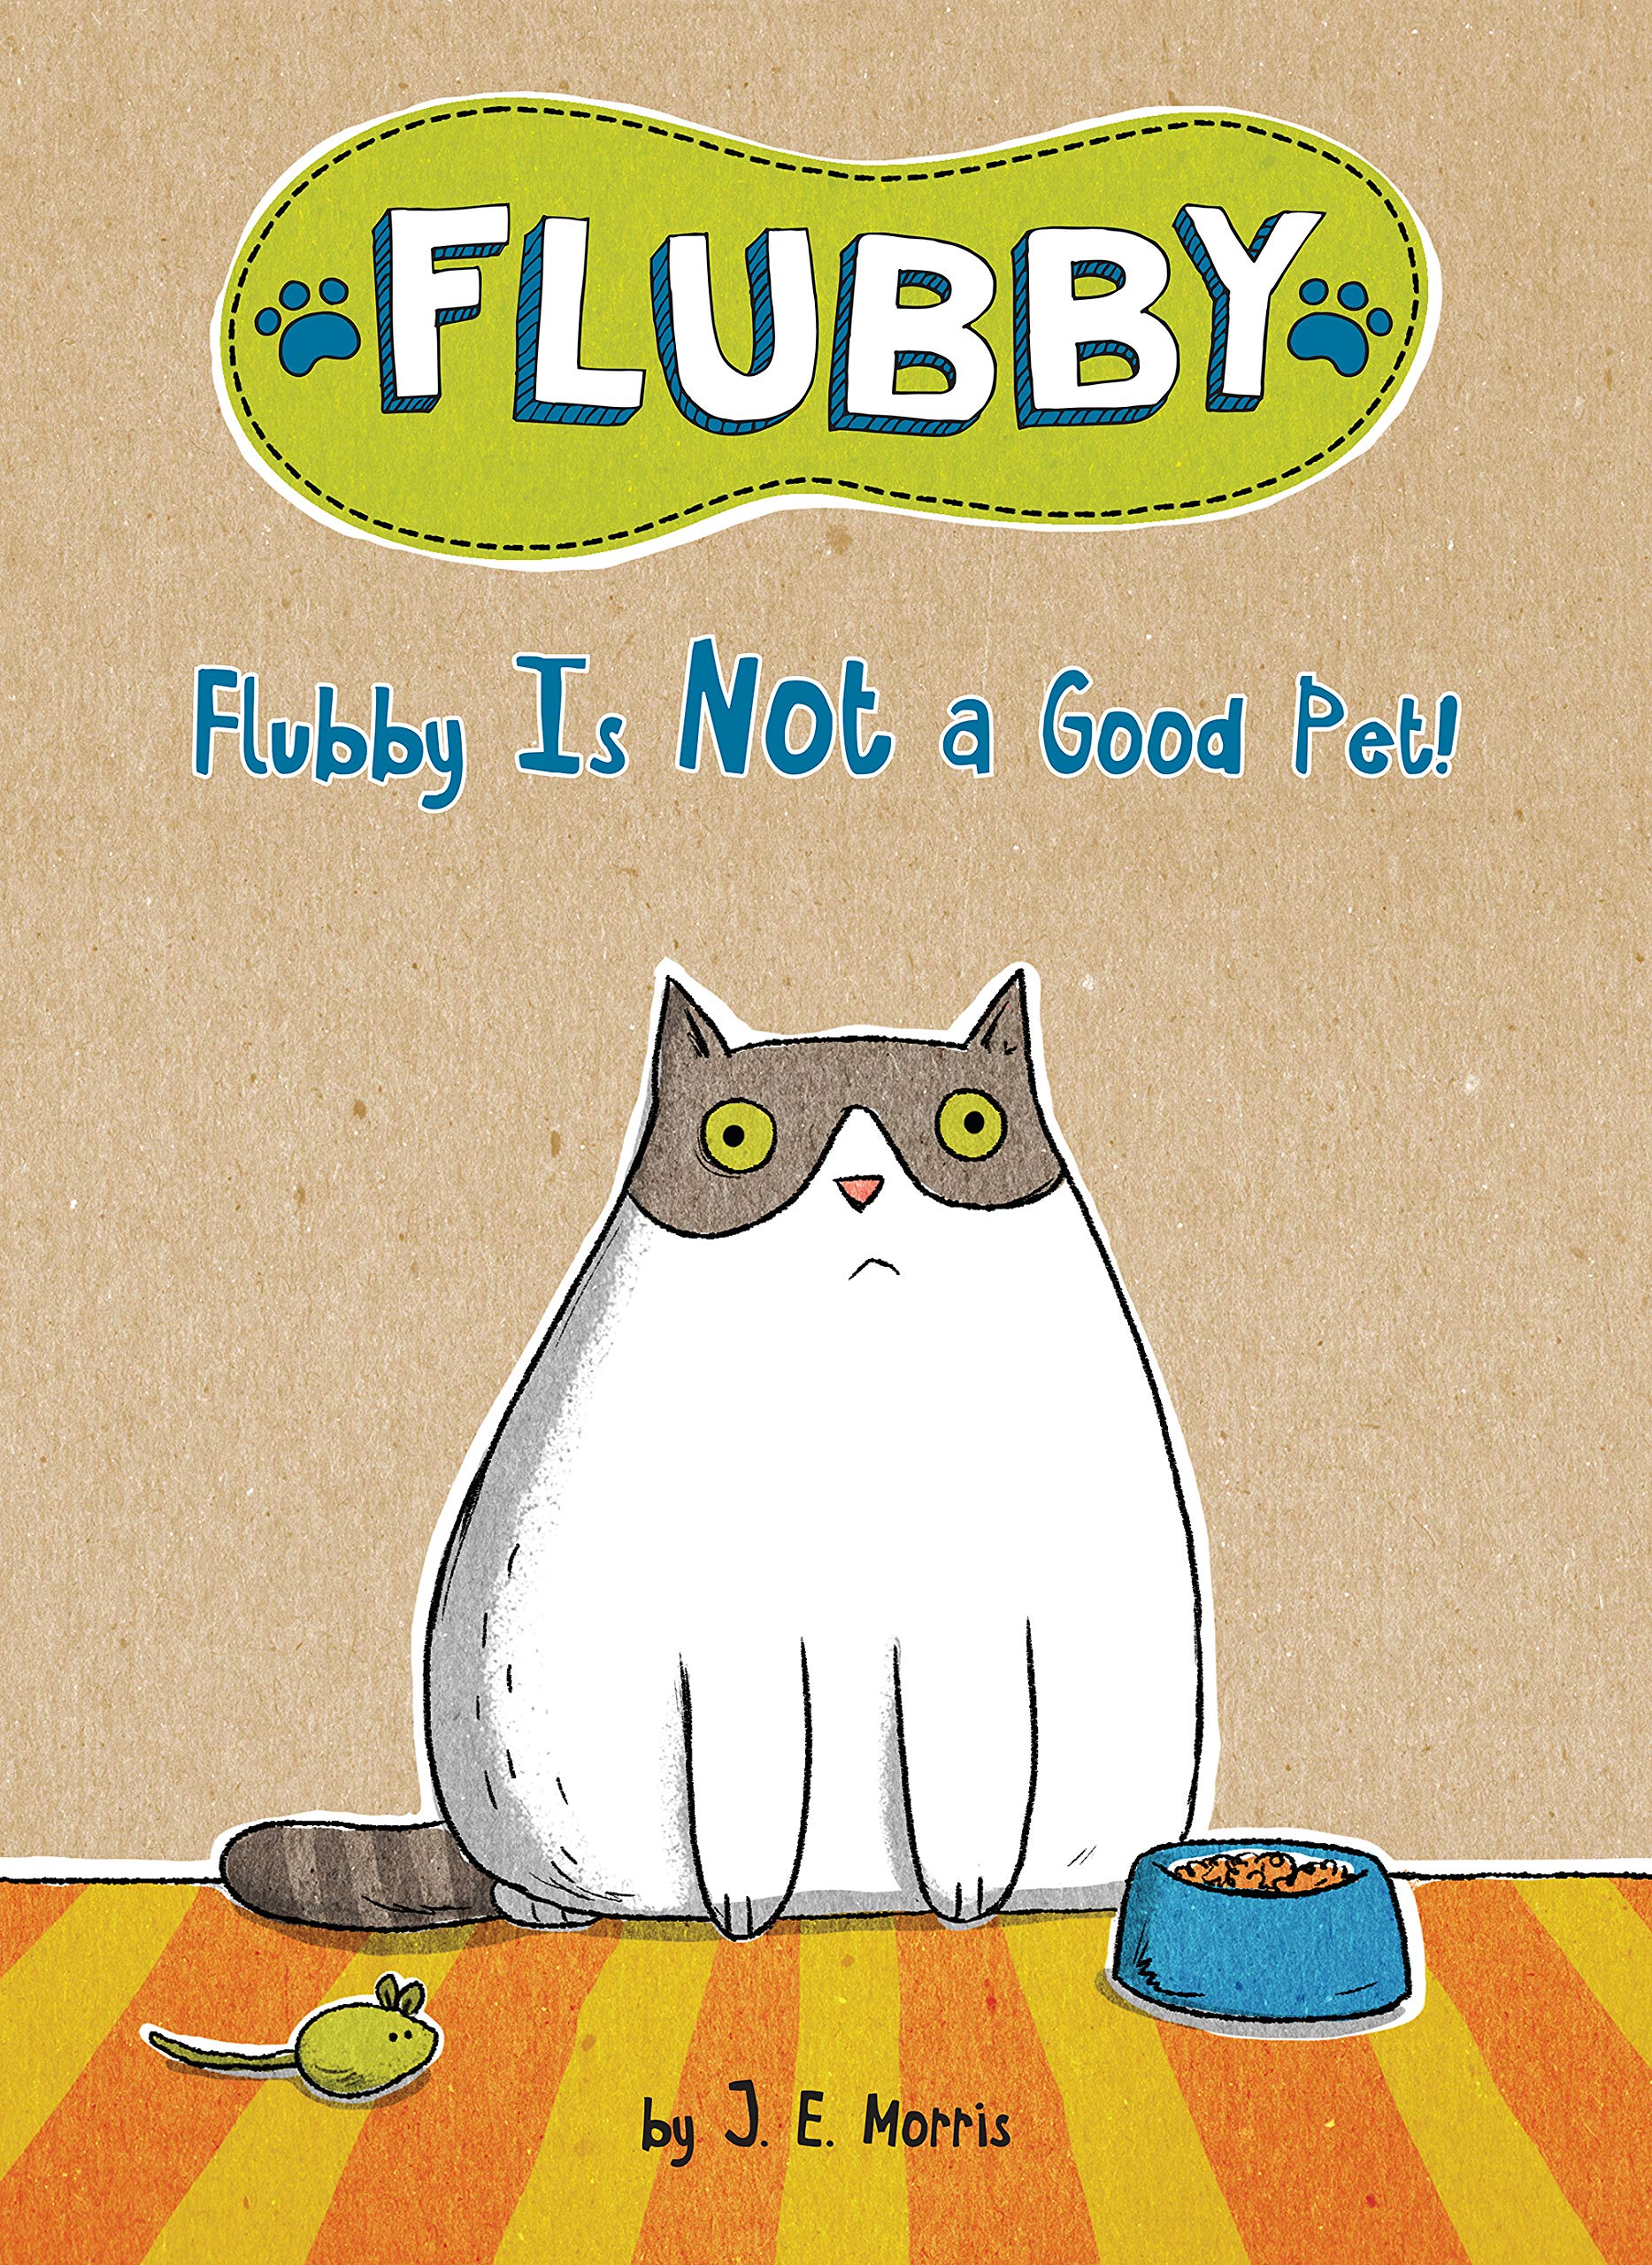 Flubby is Not a Good Pet!